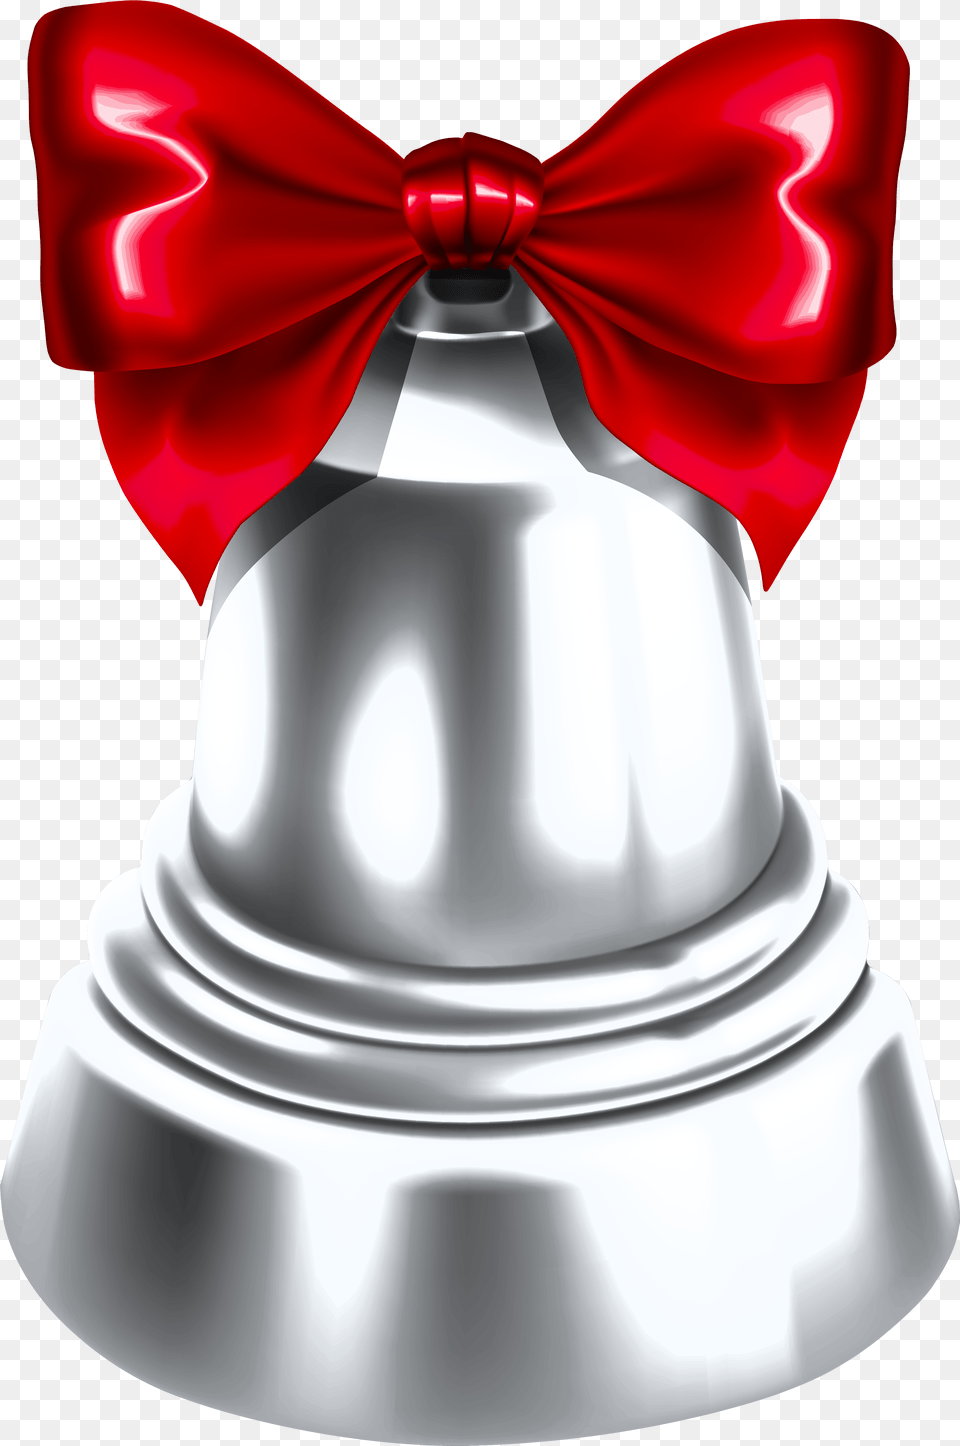 Library Of Christmas Silver Bells Black And White Silver Bells Transparent Background, Accessories, Formal Wear, Tie, Chess Free Png